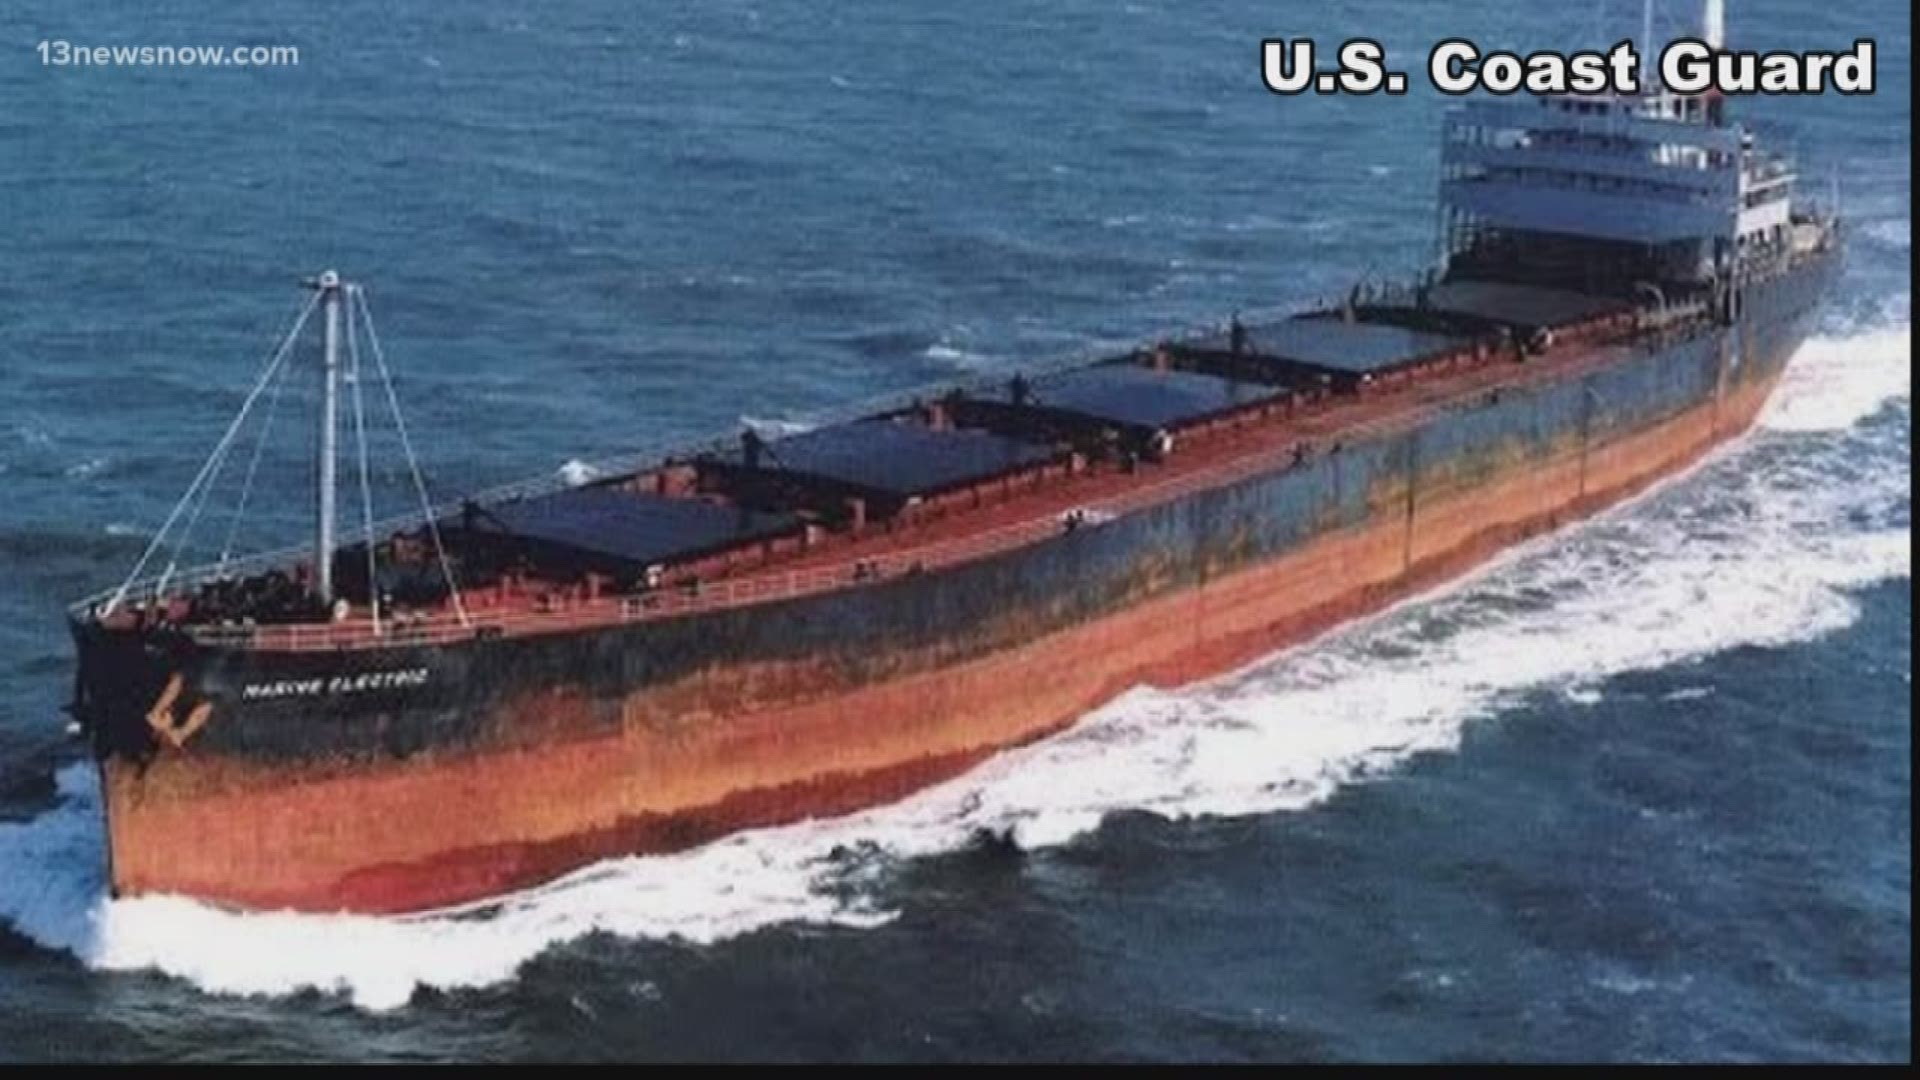 On February 12, 1983, the commercial ship Marine Electric sank 20 miles off the coast of Cape Henry.